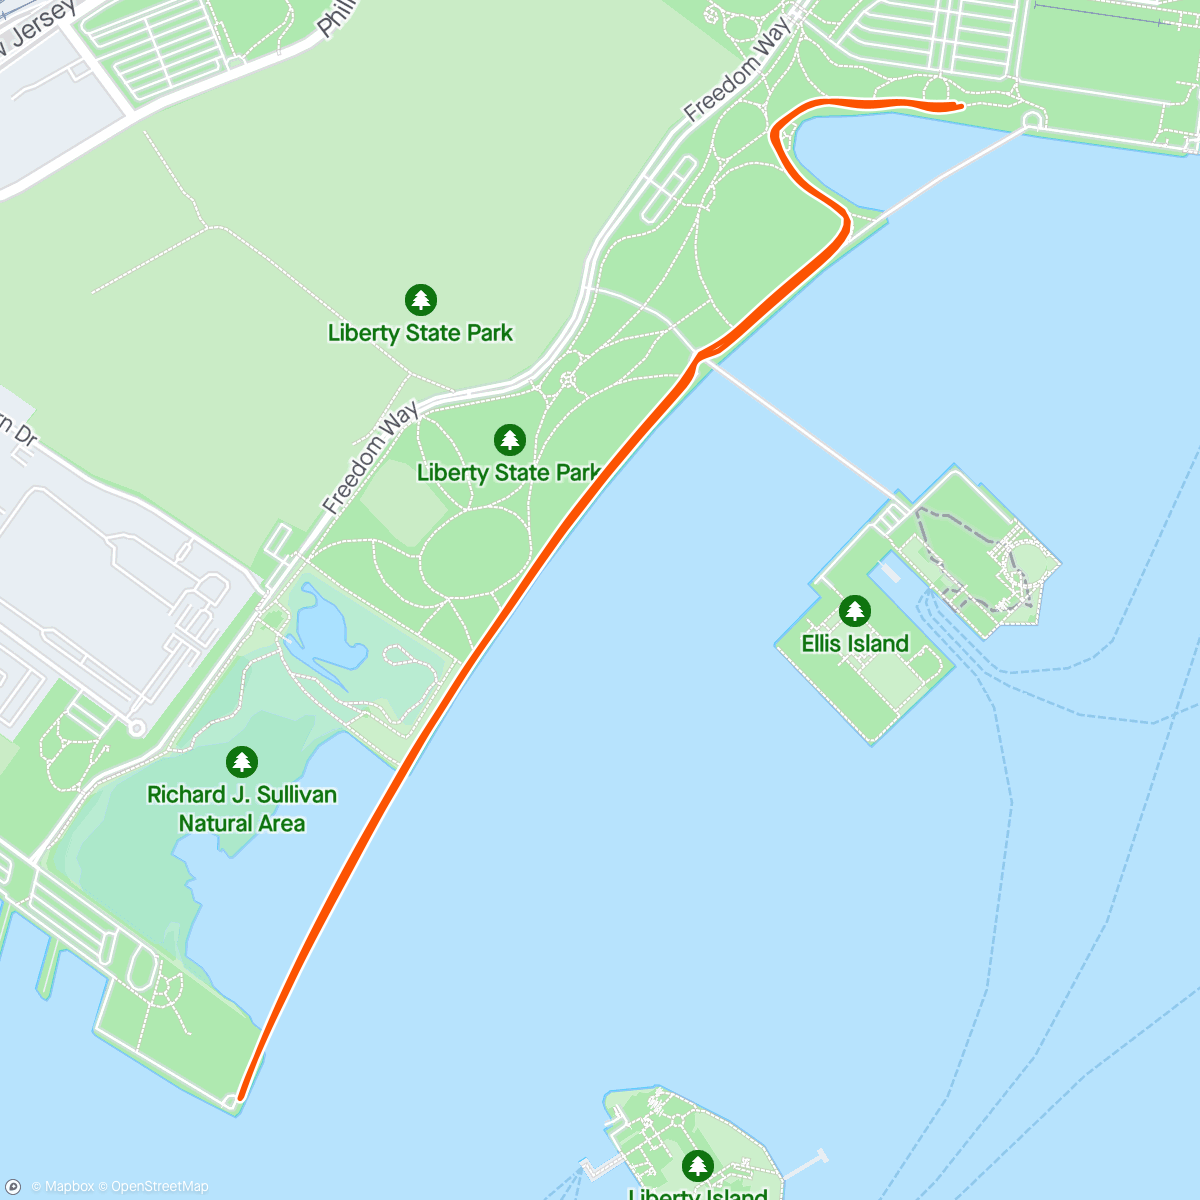 Карта физической активности (Jersey City 5k: gorgeous and historic location that I paid zero attention to as I struggled to keep my breakfast down (1st in age group; 6th overall))